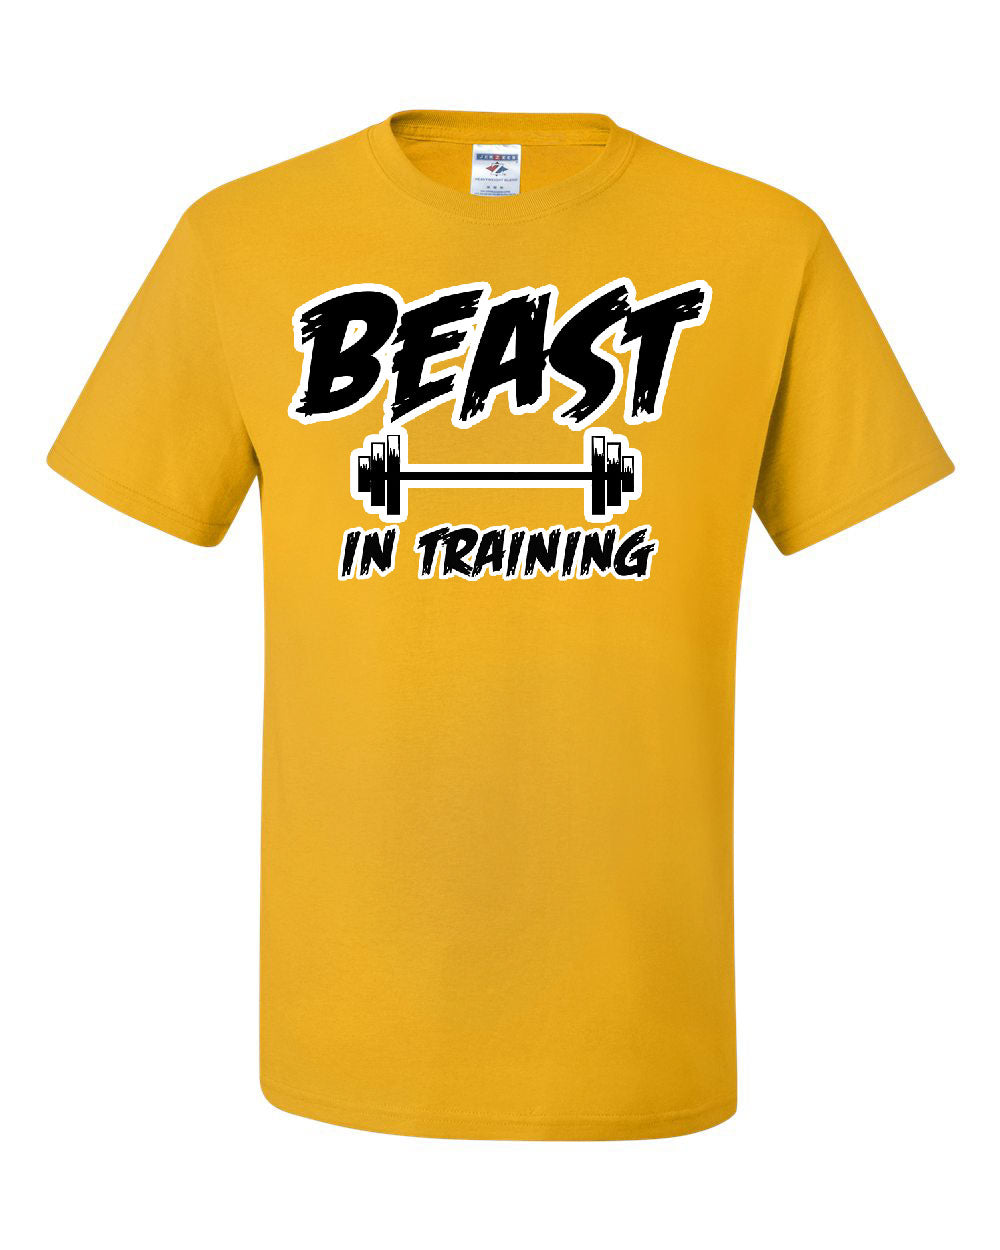 Beast In Training T-Shirt Funny Gym Workout Fitness Tee Shirt | eBay